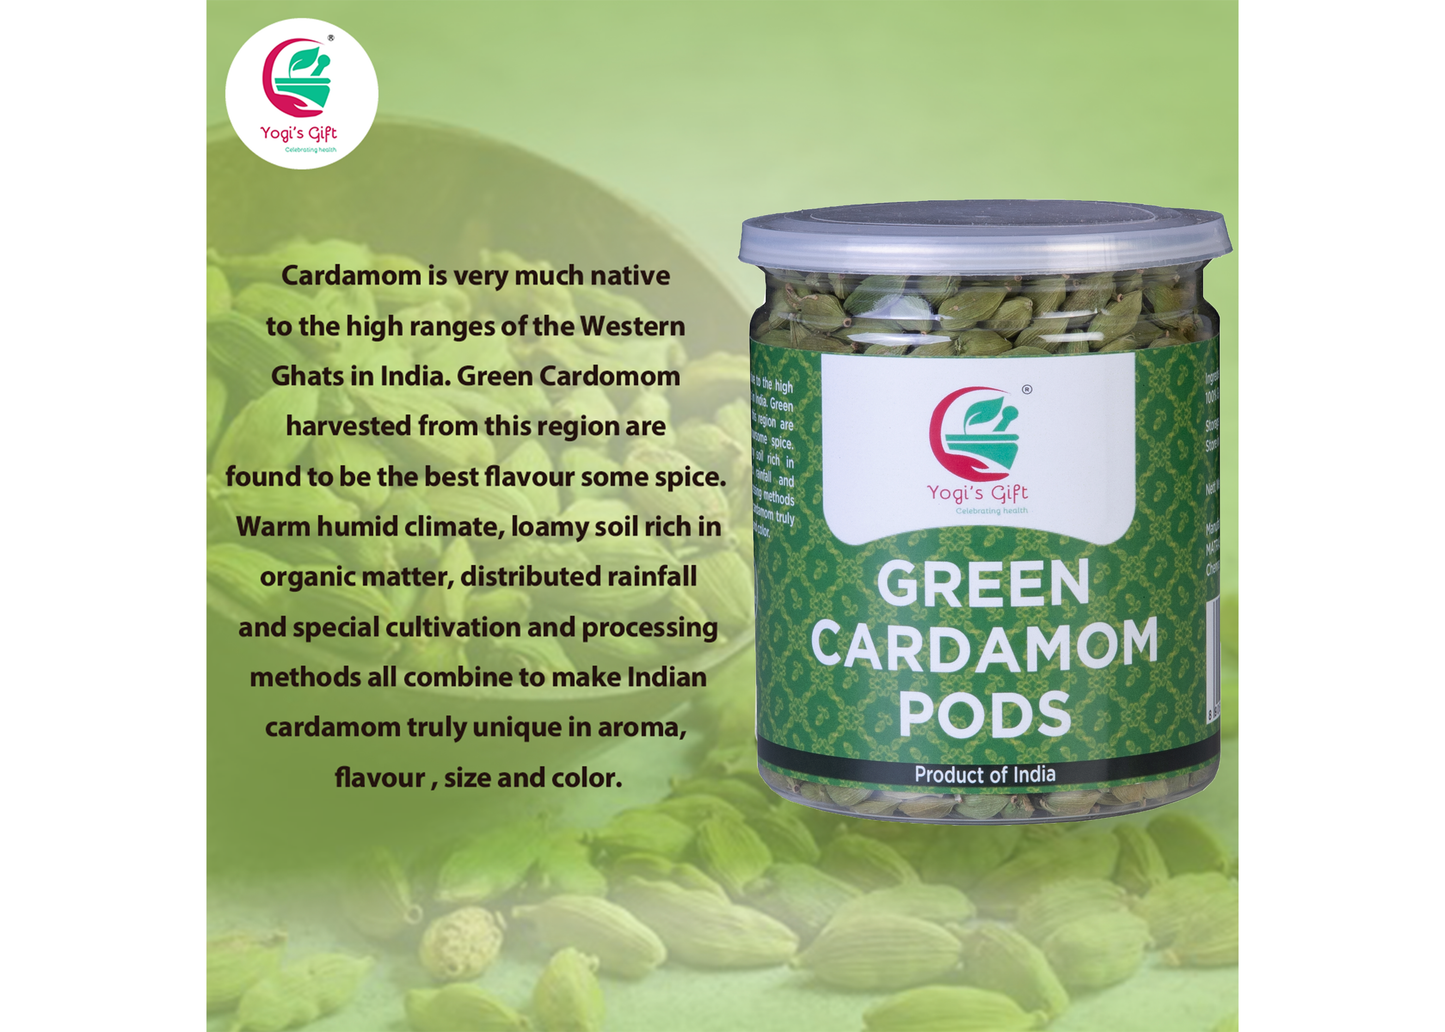 Green Cardamom pods Whole 6 Oz | Flavourful Indian Cardamon Spice | Fresh and Natural | Great for Coffee, Tea, Desserts and Baking | Yogi's Gift®